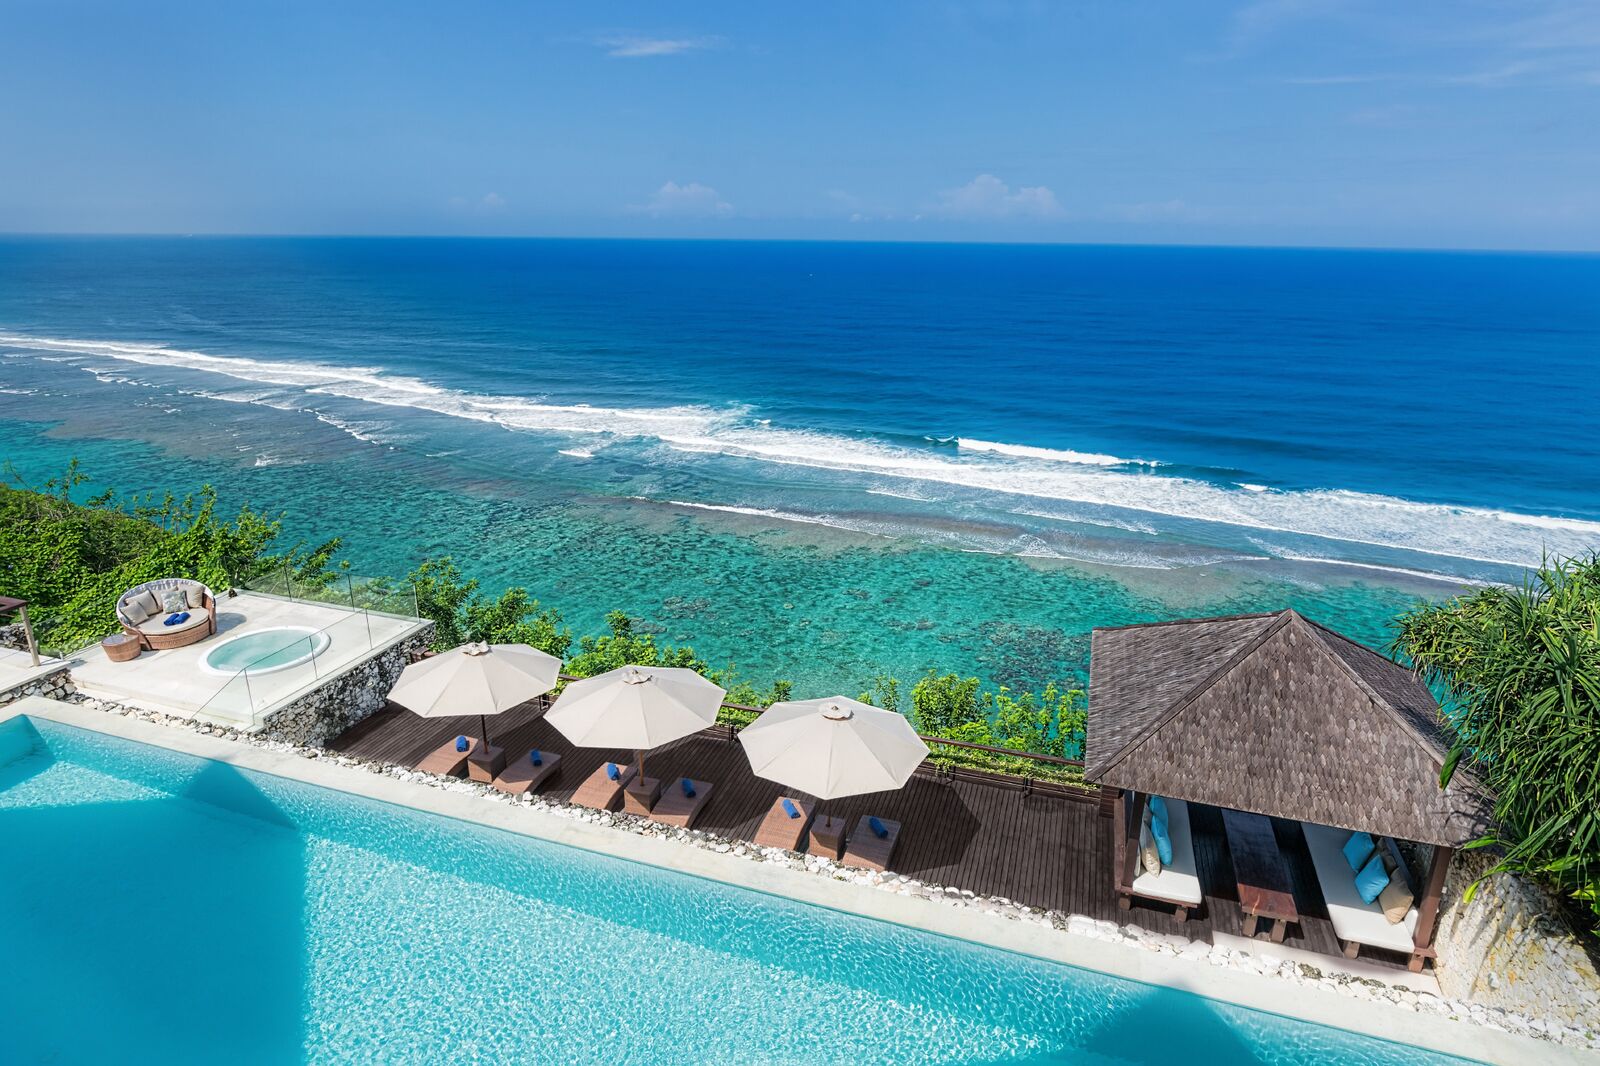 The Cheat Sheet: Best prosperity yee sangs, red eye shadows for CNY, and luxury villas in Bali